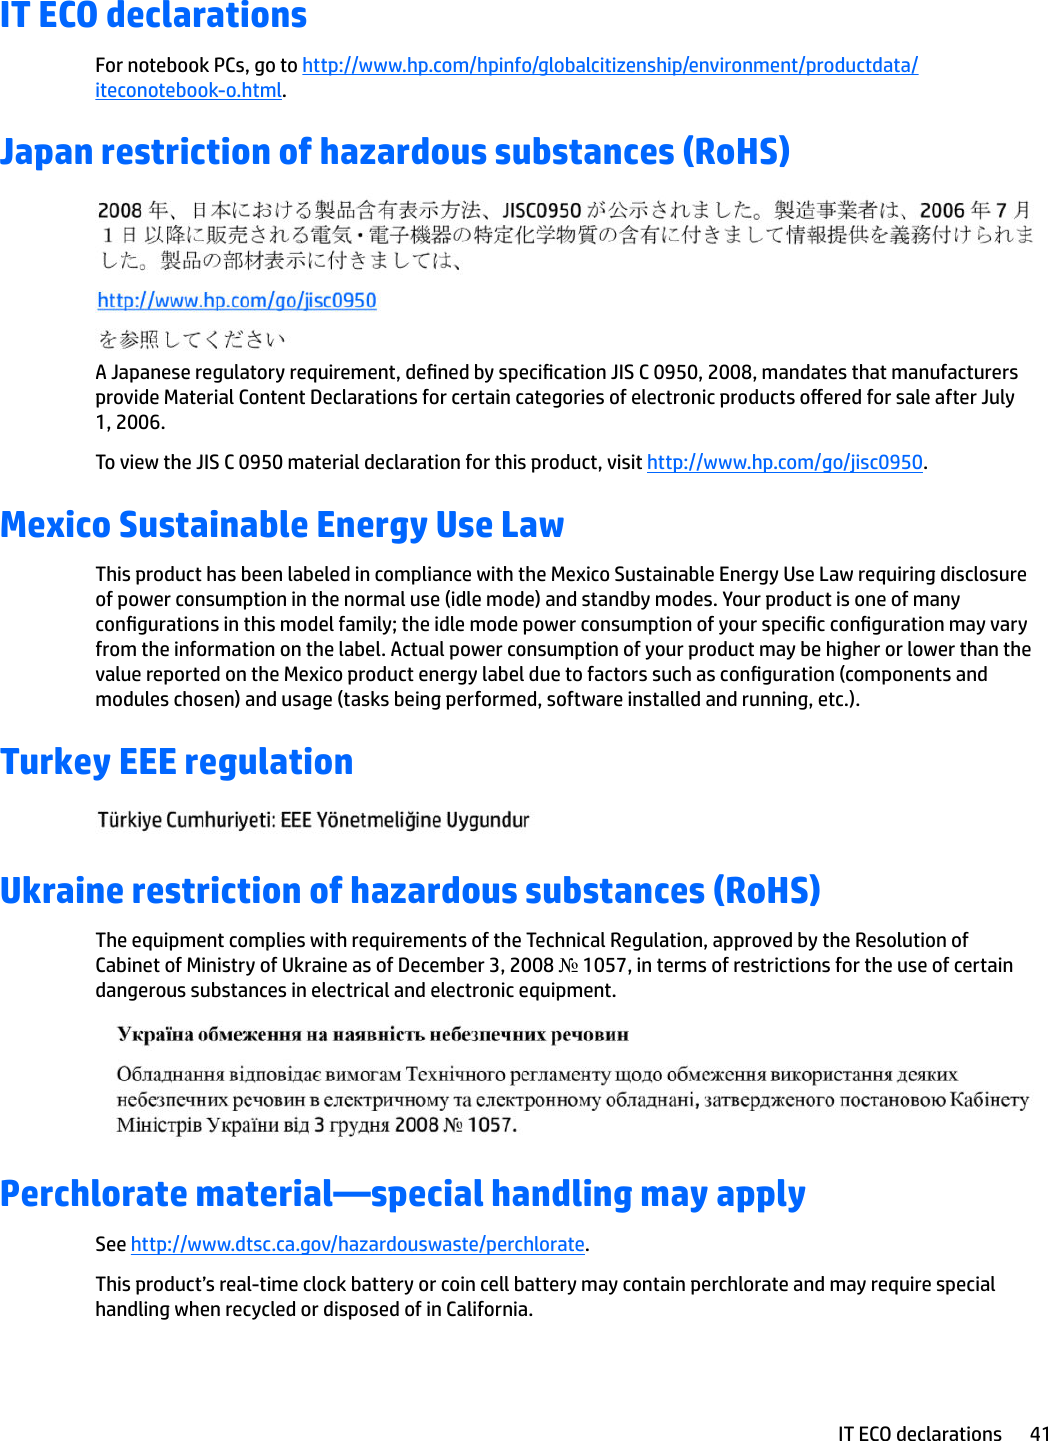 IT ECO declarationsFor notebook PCs, go to http://www.hp.com/hpinfo/globalcitizenship/environment/productdata/iteconotebook-o.html.Japan restriction of hazardous substances (RoHS)A Japanese regulatory requirement, dened by specication JIS C 0950, 2008, mandates that manufacturers provide Material Content Declarations for certain categories of electronic products oered for sale after July 1, 2006.To view the JIS C 0950 material declaration for this product, visit http://www.hp.com/go/jisc0950.Mexico Sustainable Energy Use LawThis product has been labeled in compliance with the Mexico Sustainable Energy Use Law requiring disclosure of power consumption in the normal use (idle mode) and standby modes. Your product is one of many congurations in this model family; the idle mode power consumption of your specic conguration may vary from the information on the label. Actual power consumption of your product may be higher or lower than the value reported on the Mexico product energy label due to factors such as conguration (components and modules chosen) and usage (tasks being performed, software installed and running, etc.).Turkey EEE regulationUkraine restriction of hazardous substances (RoHS)The equipment complies with requirements of the Technical Regulation, approved by the Resolution of Cabinet of Ministry of Ukraine as of December 3, 2008 № 1057, in terms of restrictions for the use of certain dangerous substances in electrical and electronic equipment.Perchlorate material—special handling may applySee http://www.dtsc.ca.gov/hazardouswaste/perchlorate.This product’s real-time clock battery or coin cell battery may contain perchlorate and may require special handling when recycled or disposed of in California. IT ECO declarations 41